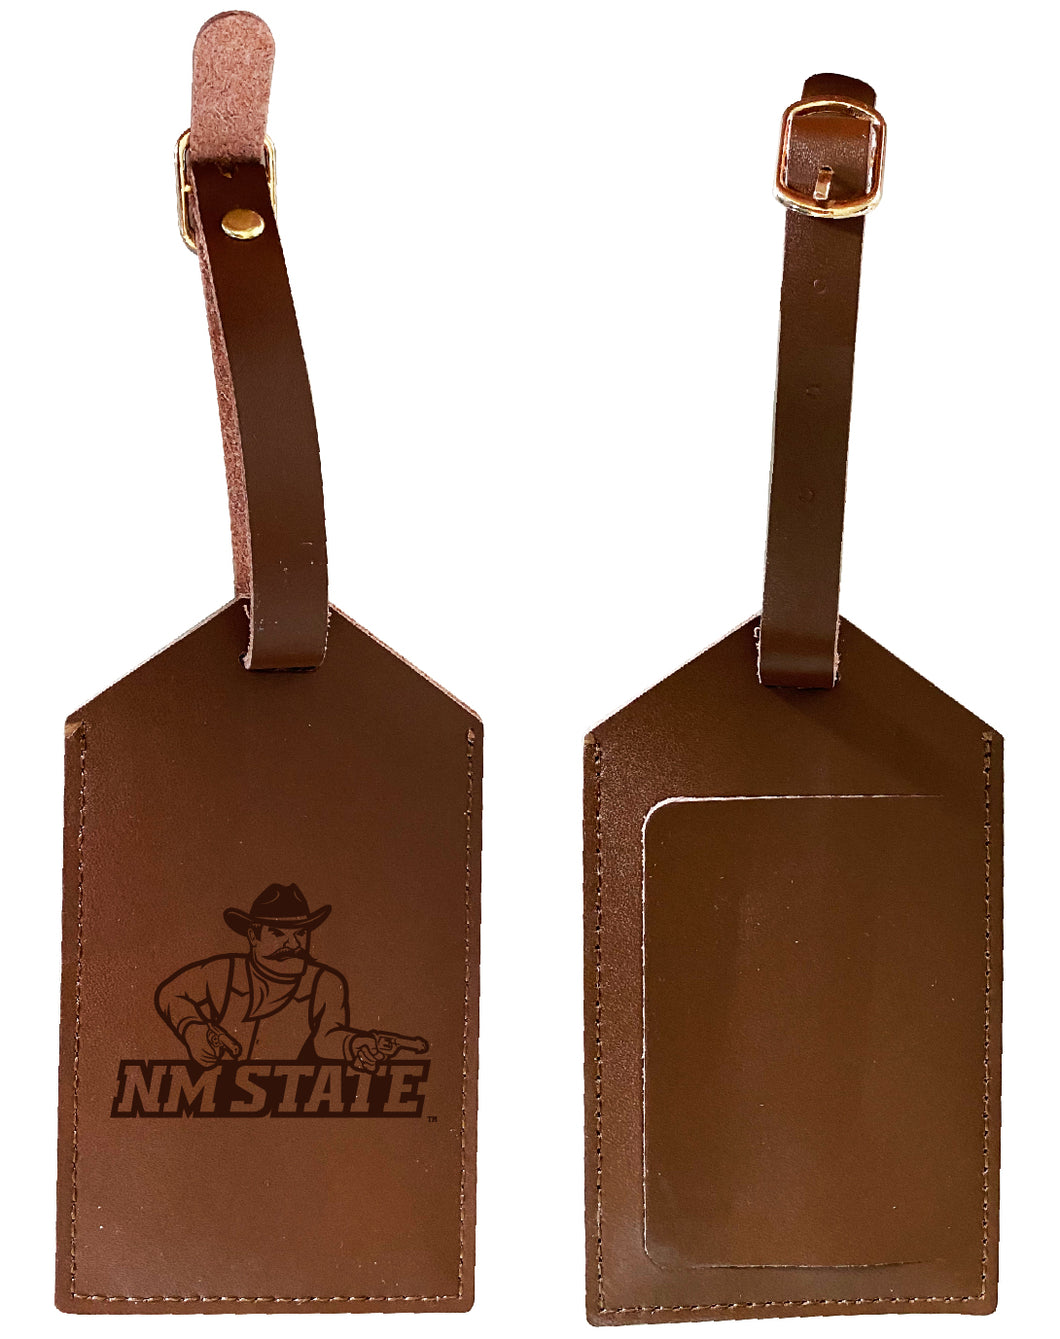 New Mexico State University Pistol Pete Leather Luggage Tag Engraved